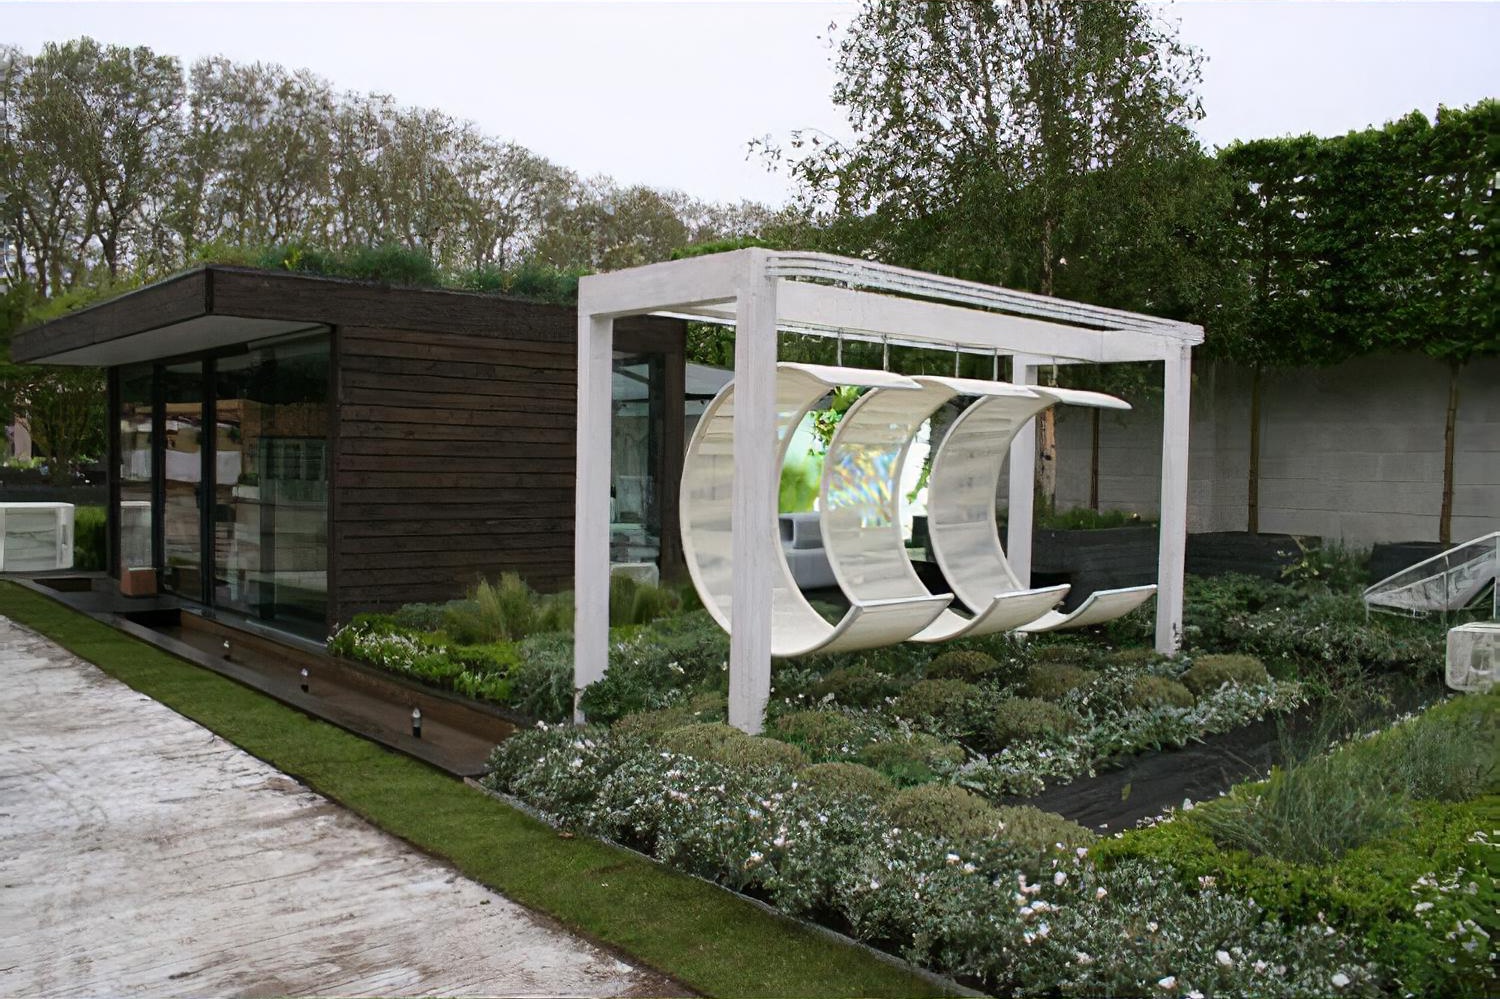 RHS Chelsea Flower Show 2012 Rooftop Workplace for Tomorrow designed by Patricia Fox at Aralia for Walworth Garden Farm, sponsored by RBS